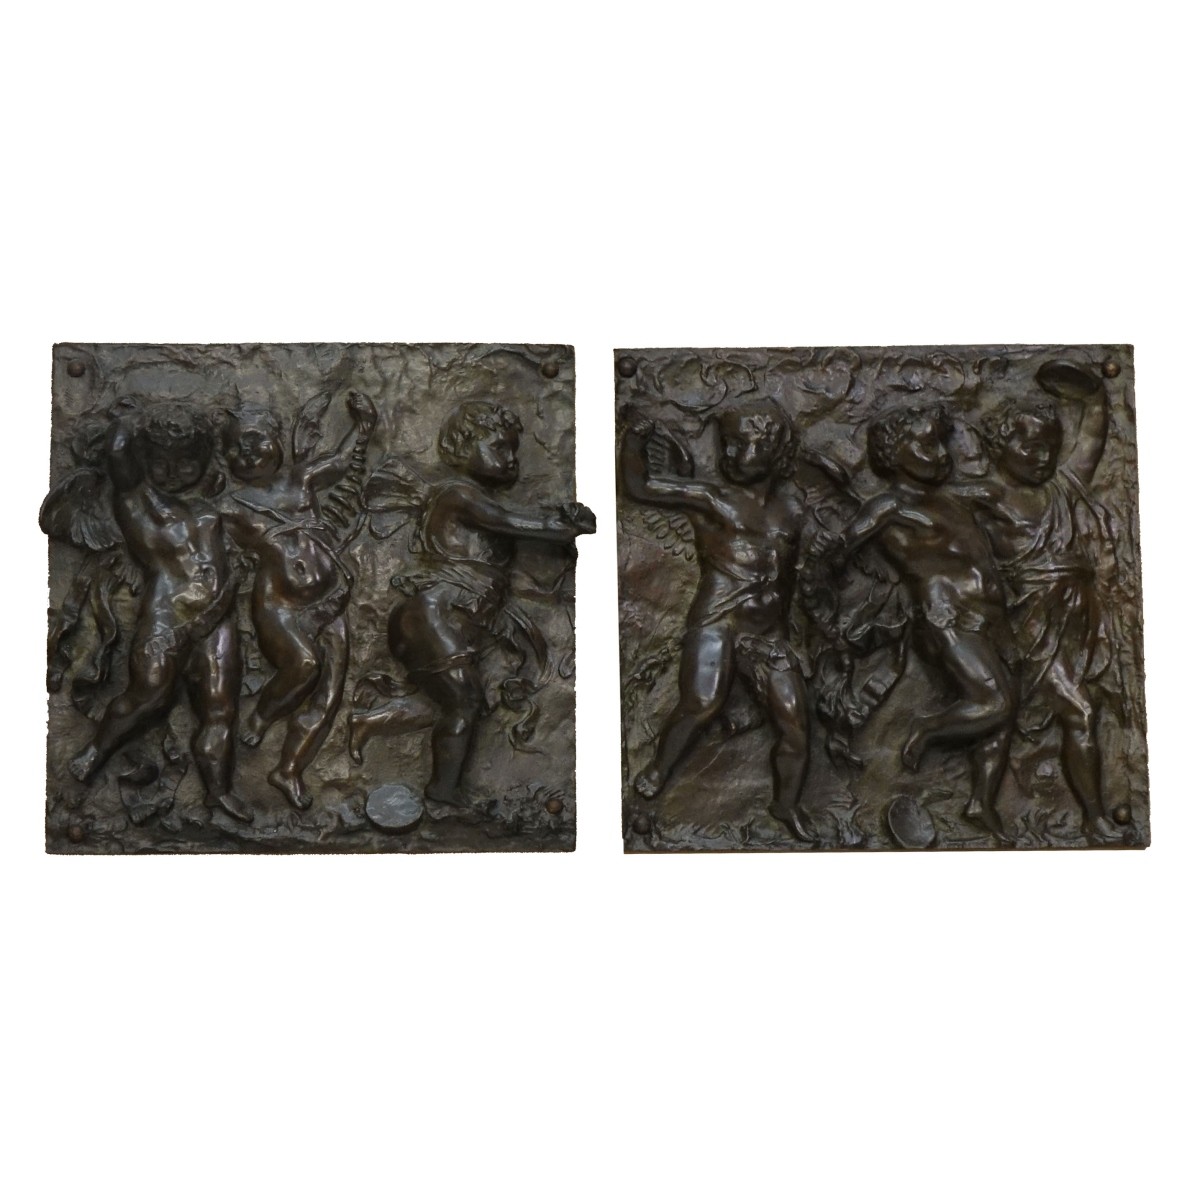 Pair of Bacchanal Relief Plaques